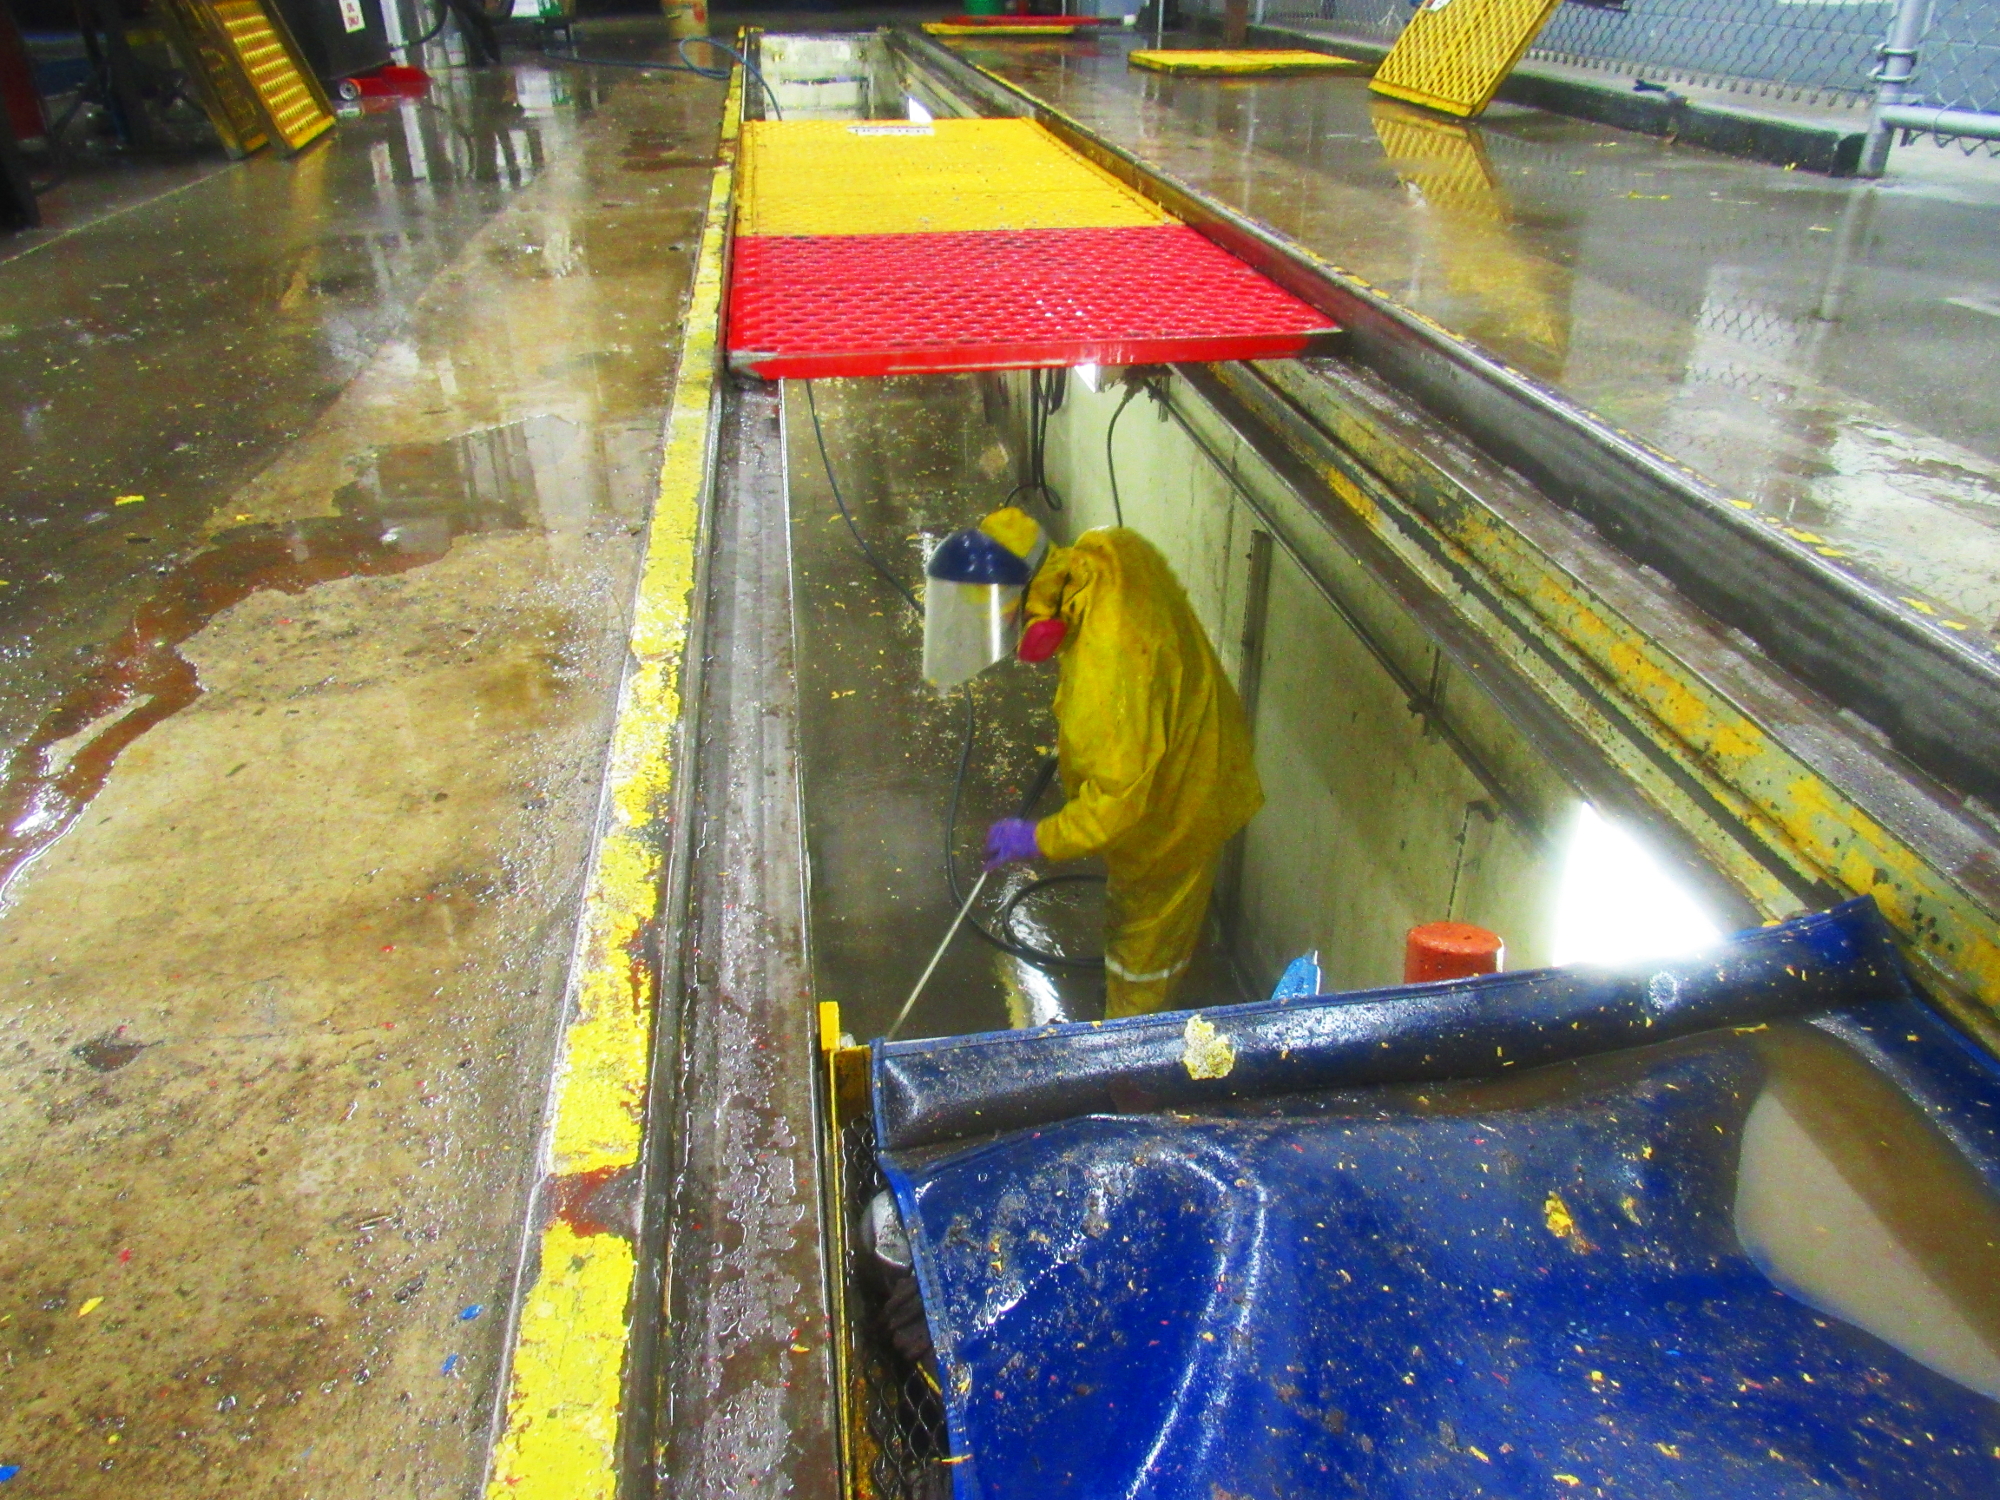 Expert in hazmat suit power washing factory for industrial chemical cleaning